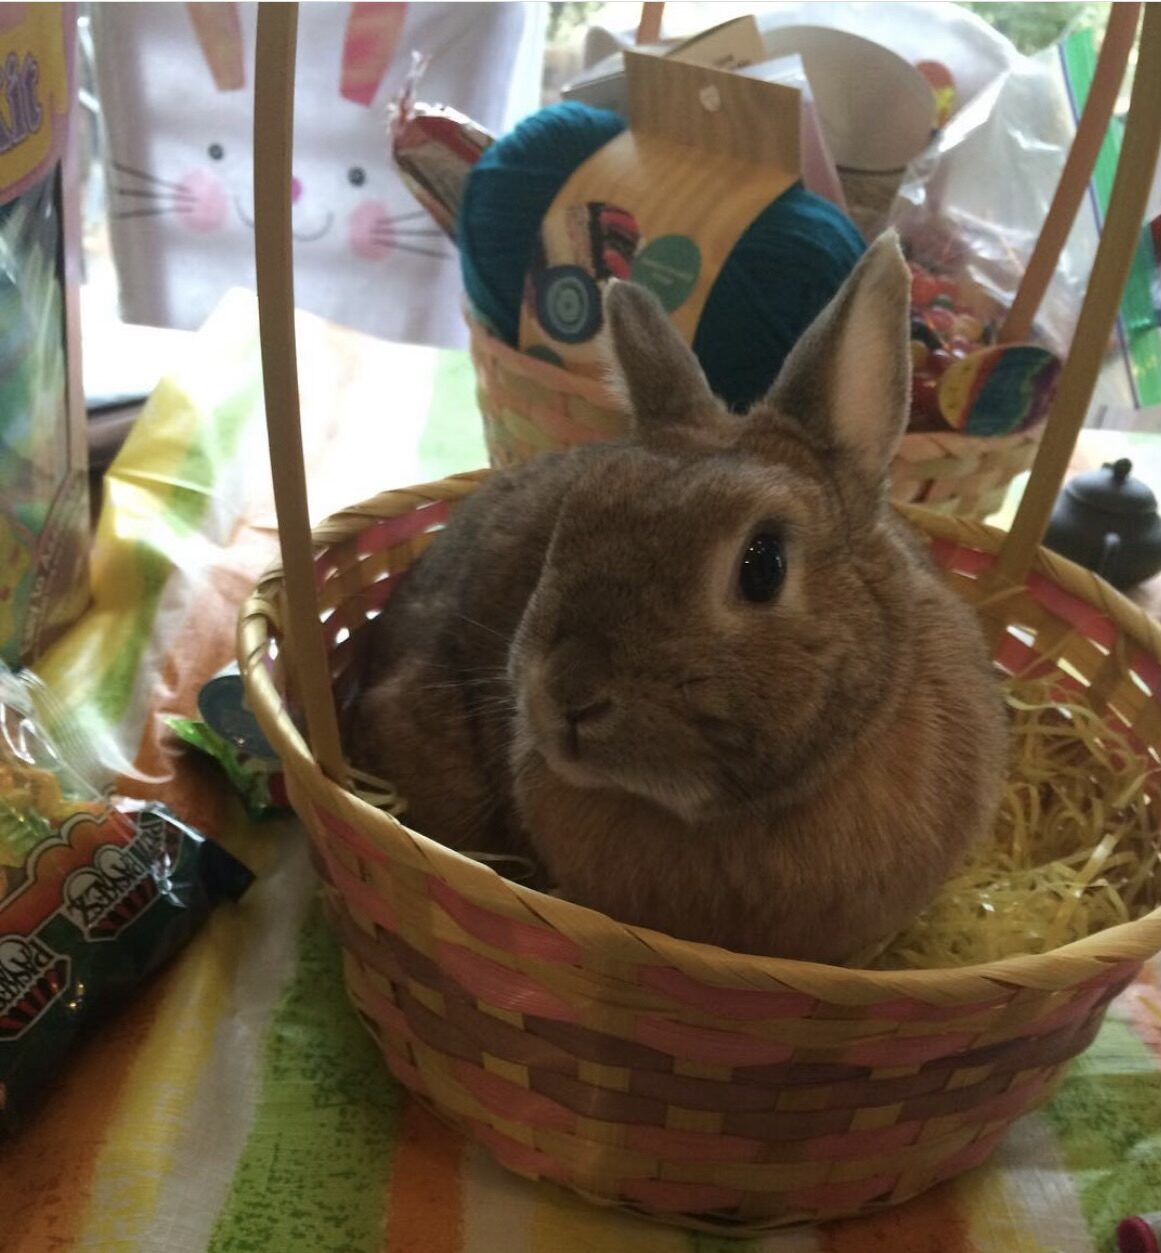 OPINION: Students should avoid giving bunnies as Easter gifts